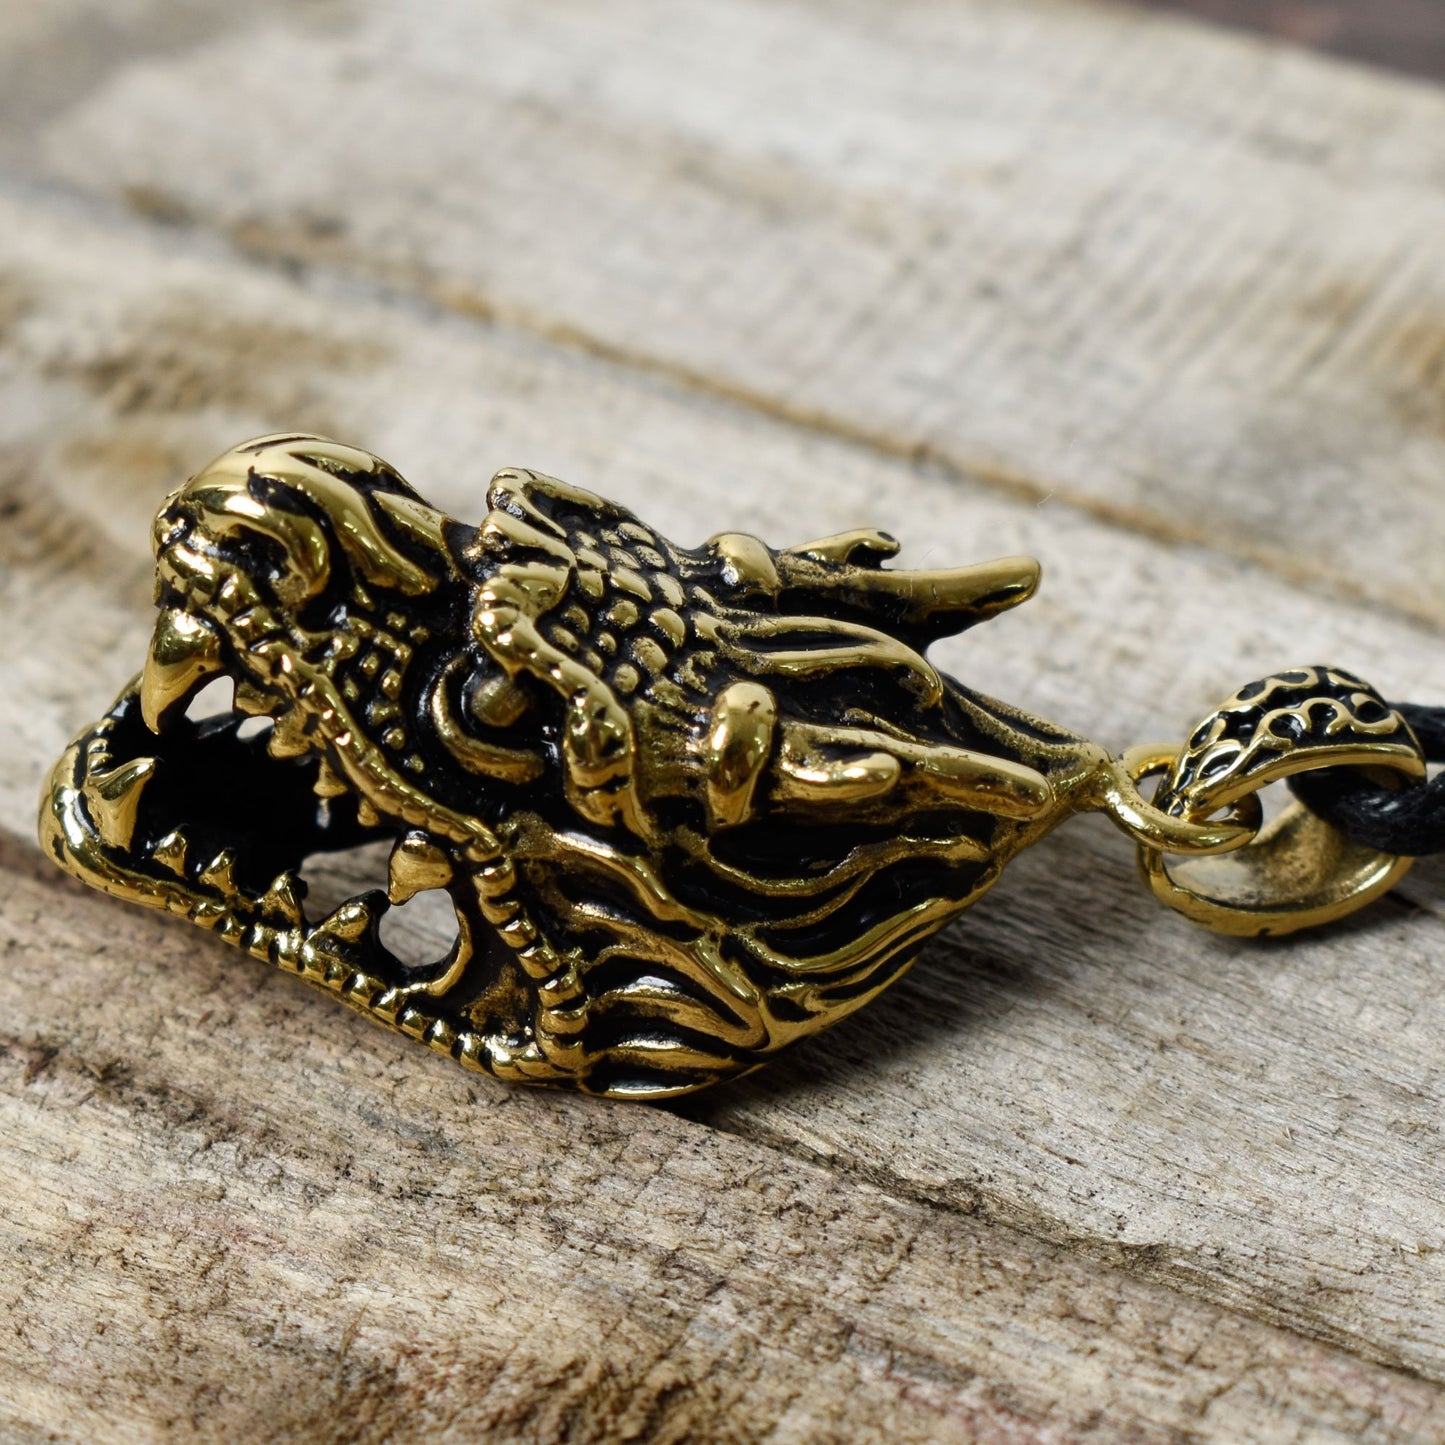 Dragon Head Pendant Sterling Silver-Brass Necklace Charm Jewelry